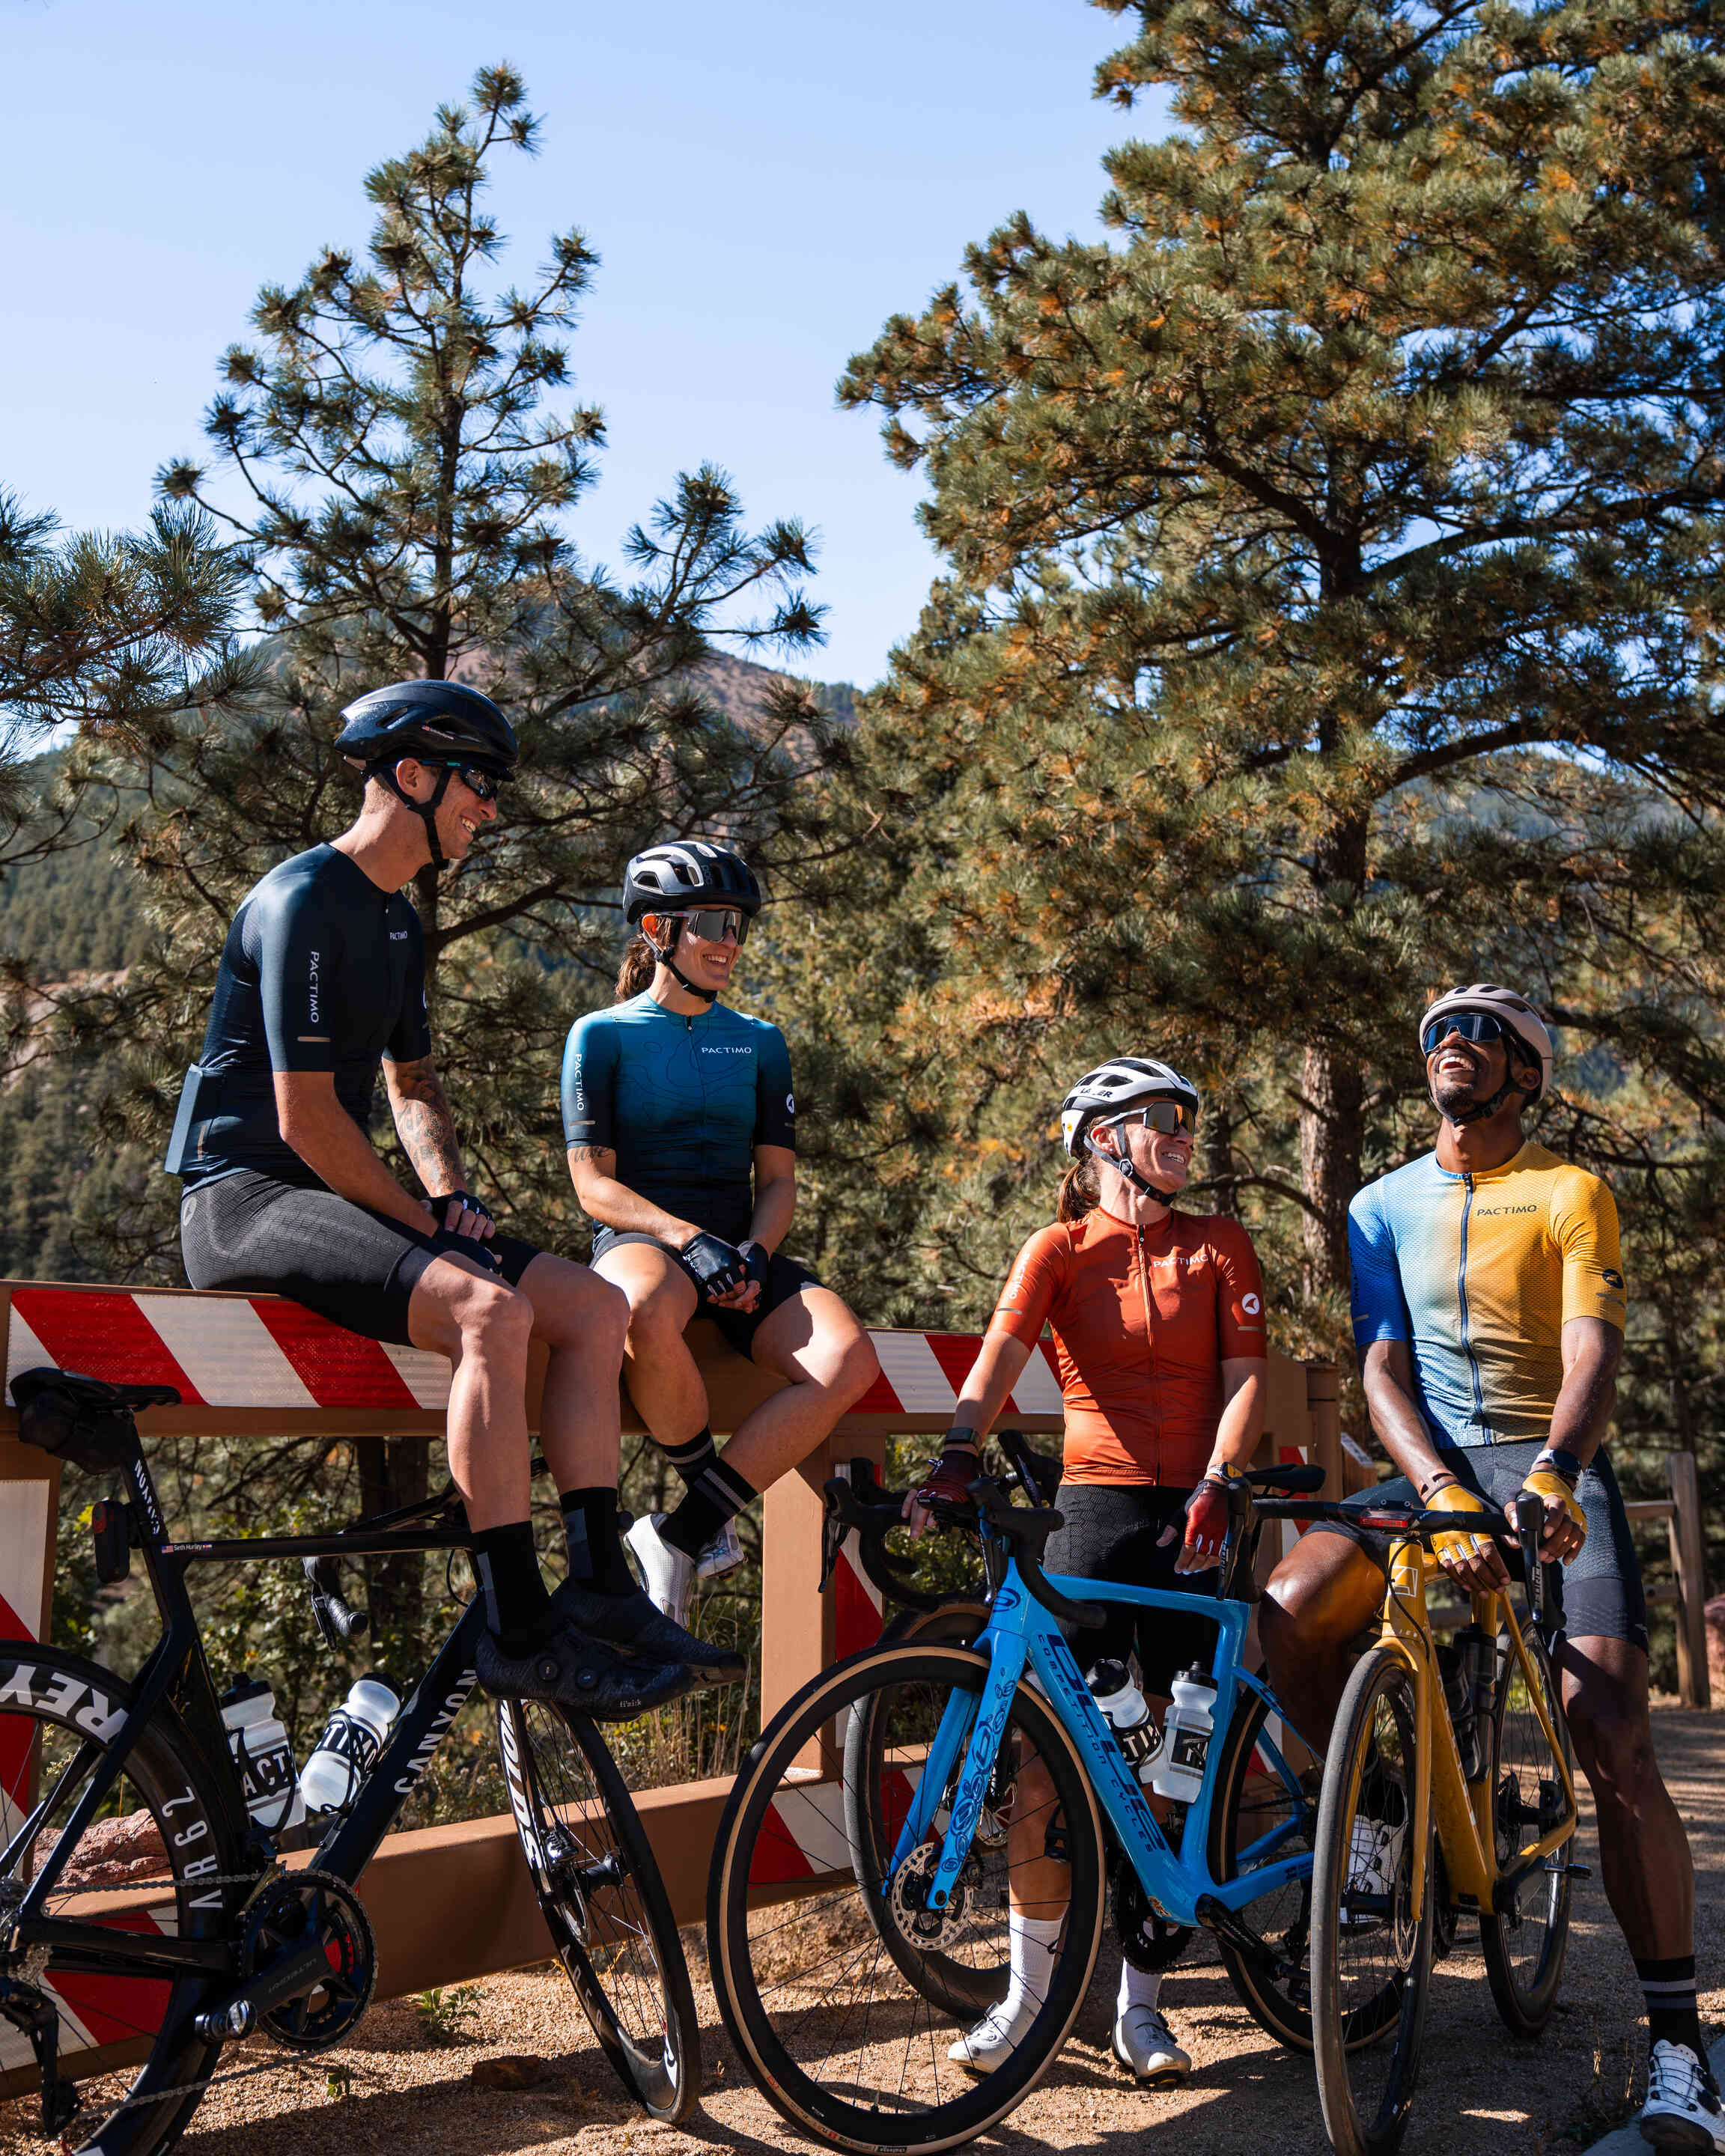 Spring '24 Cycling Clothing Line from Pactimo